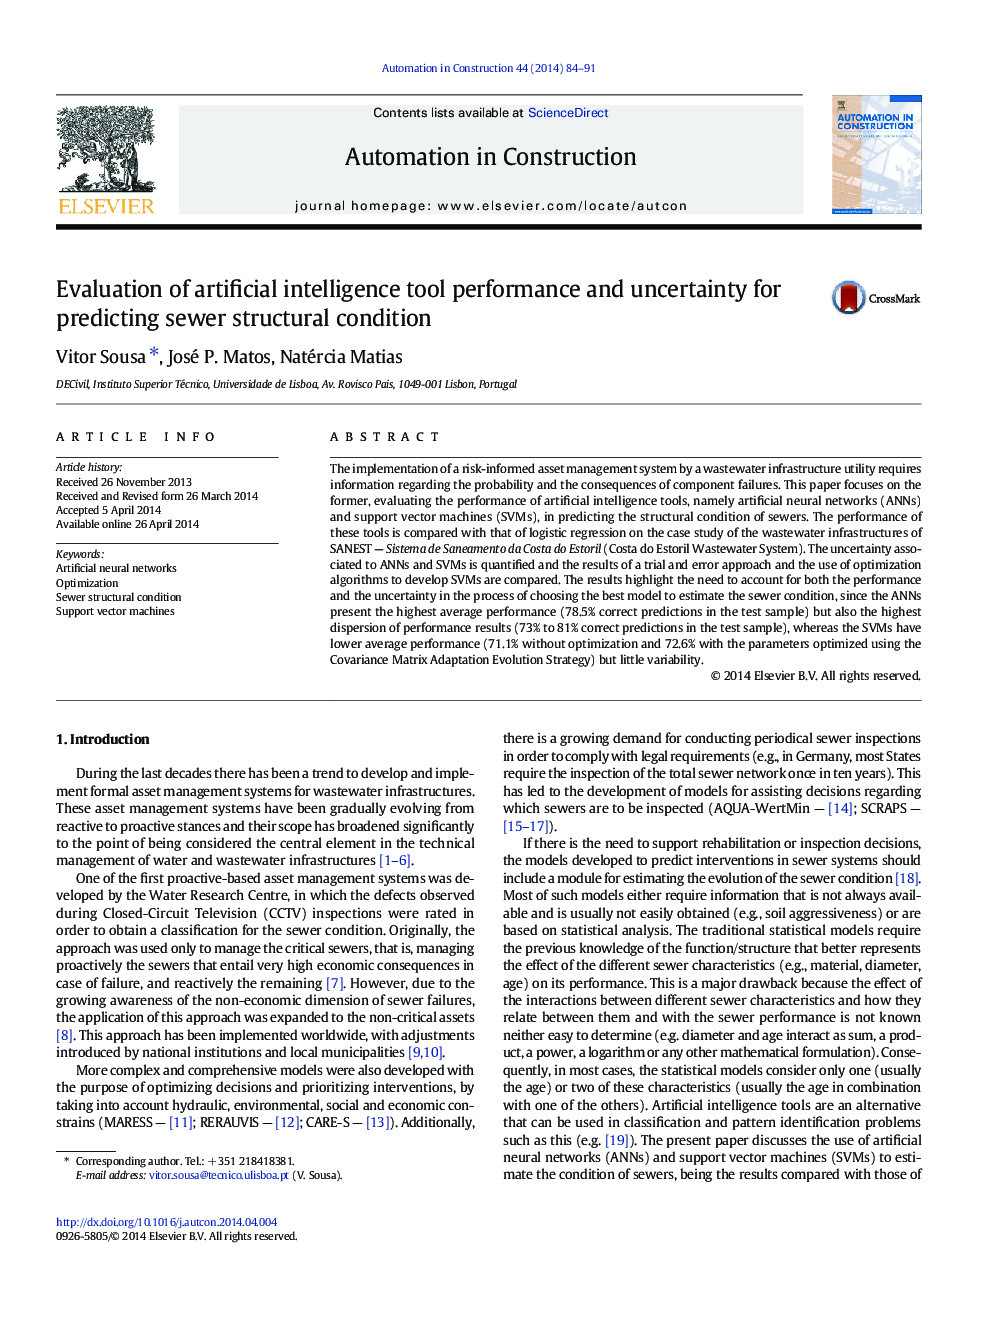 Evaluation of artificial intelligence tool performance and uncertainty for predicting sewer structural condition